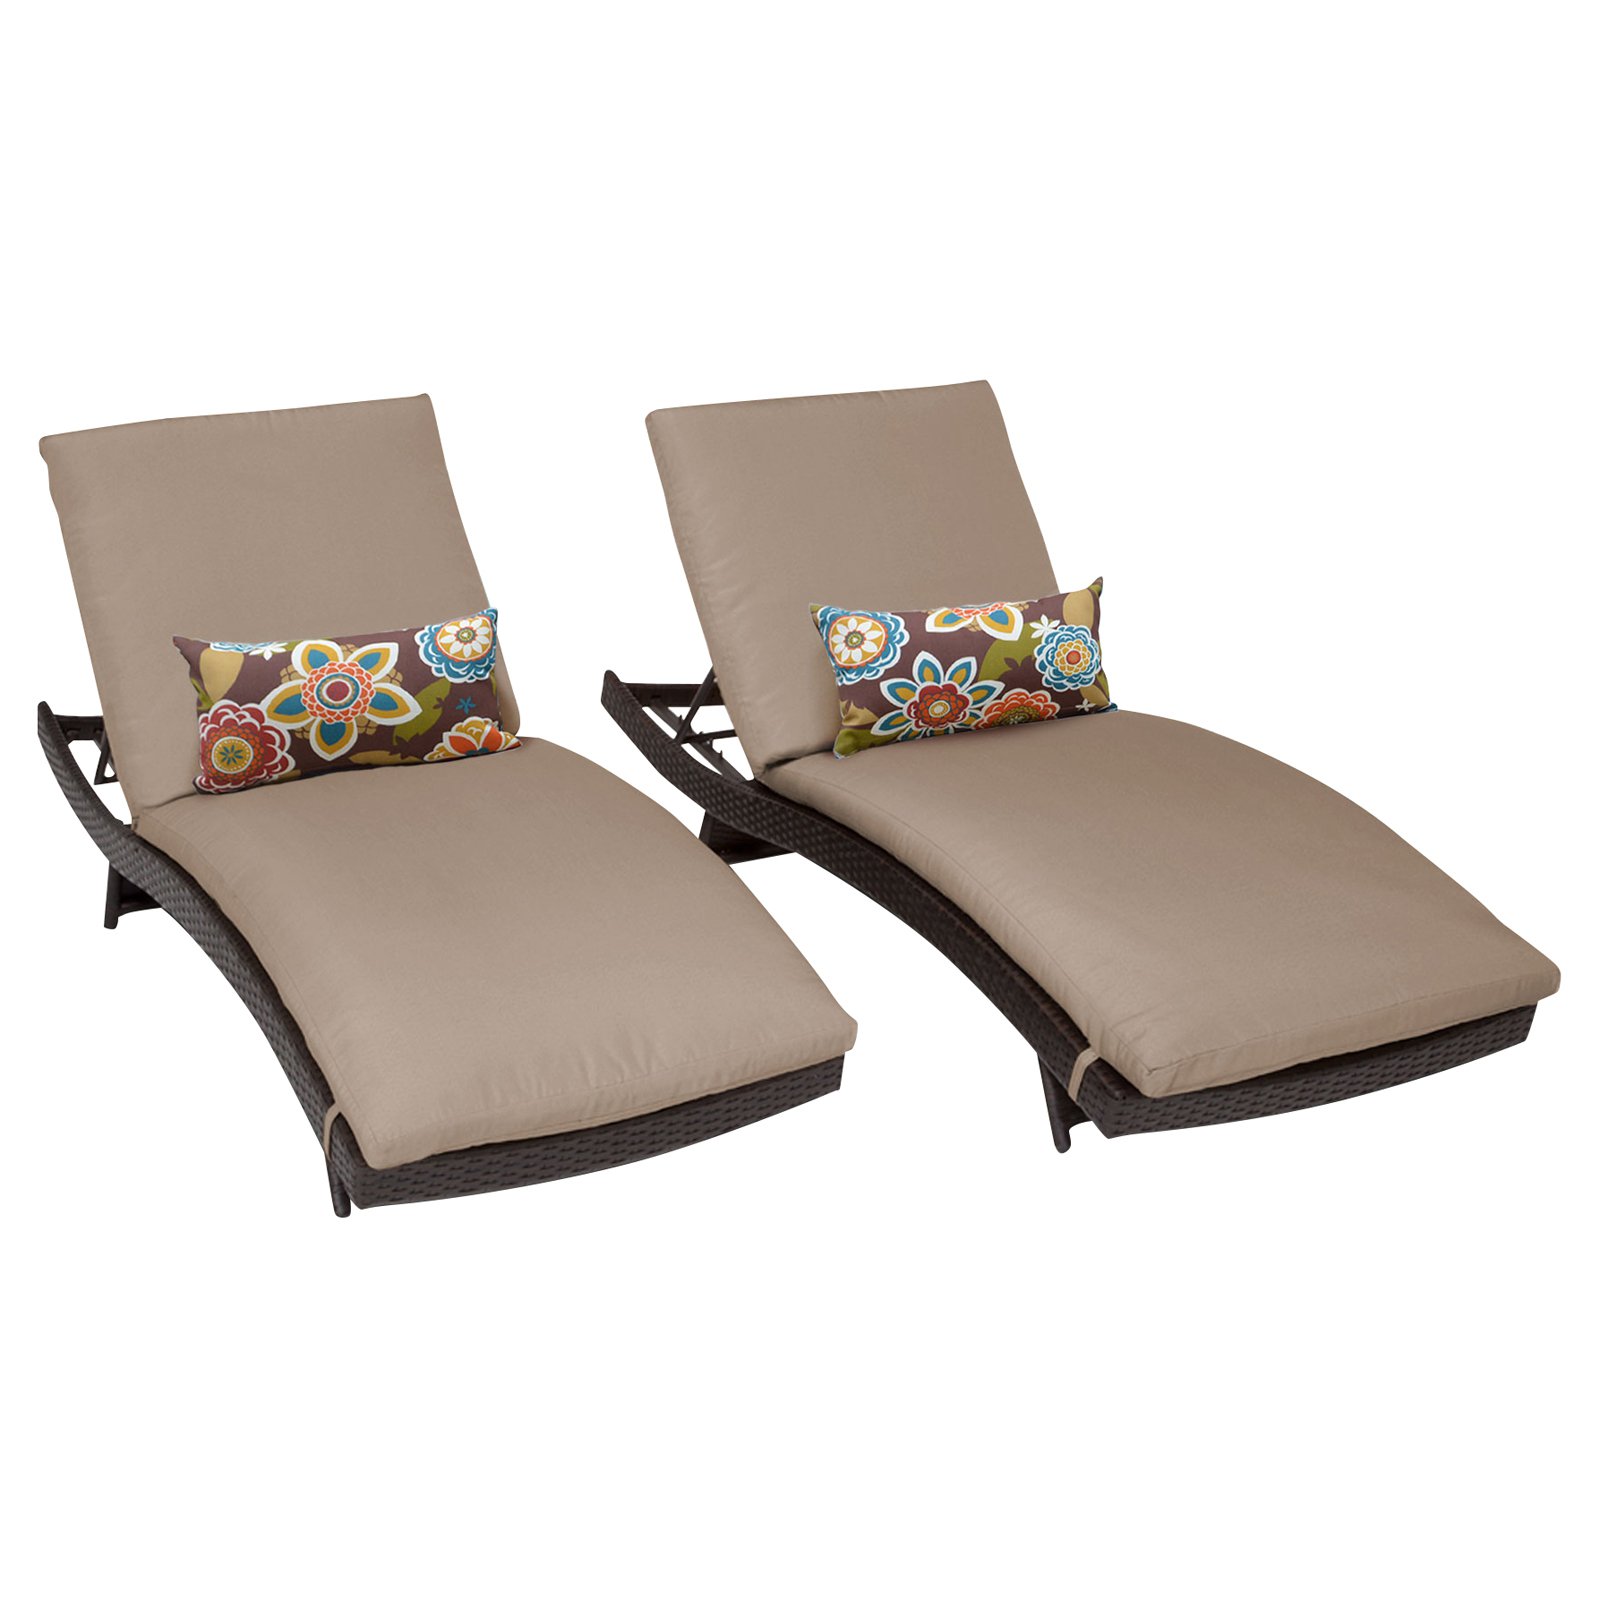 Barbados Curved Chaise Outdoor Wicker Patio Furniture in Cilantro (Set of 2) - image 2 of 4